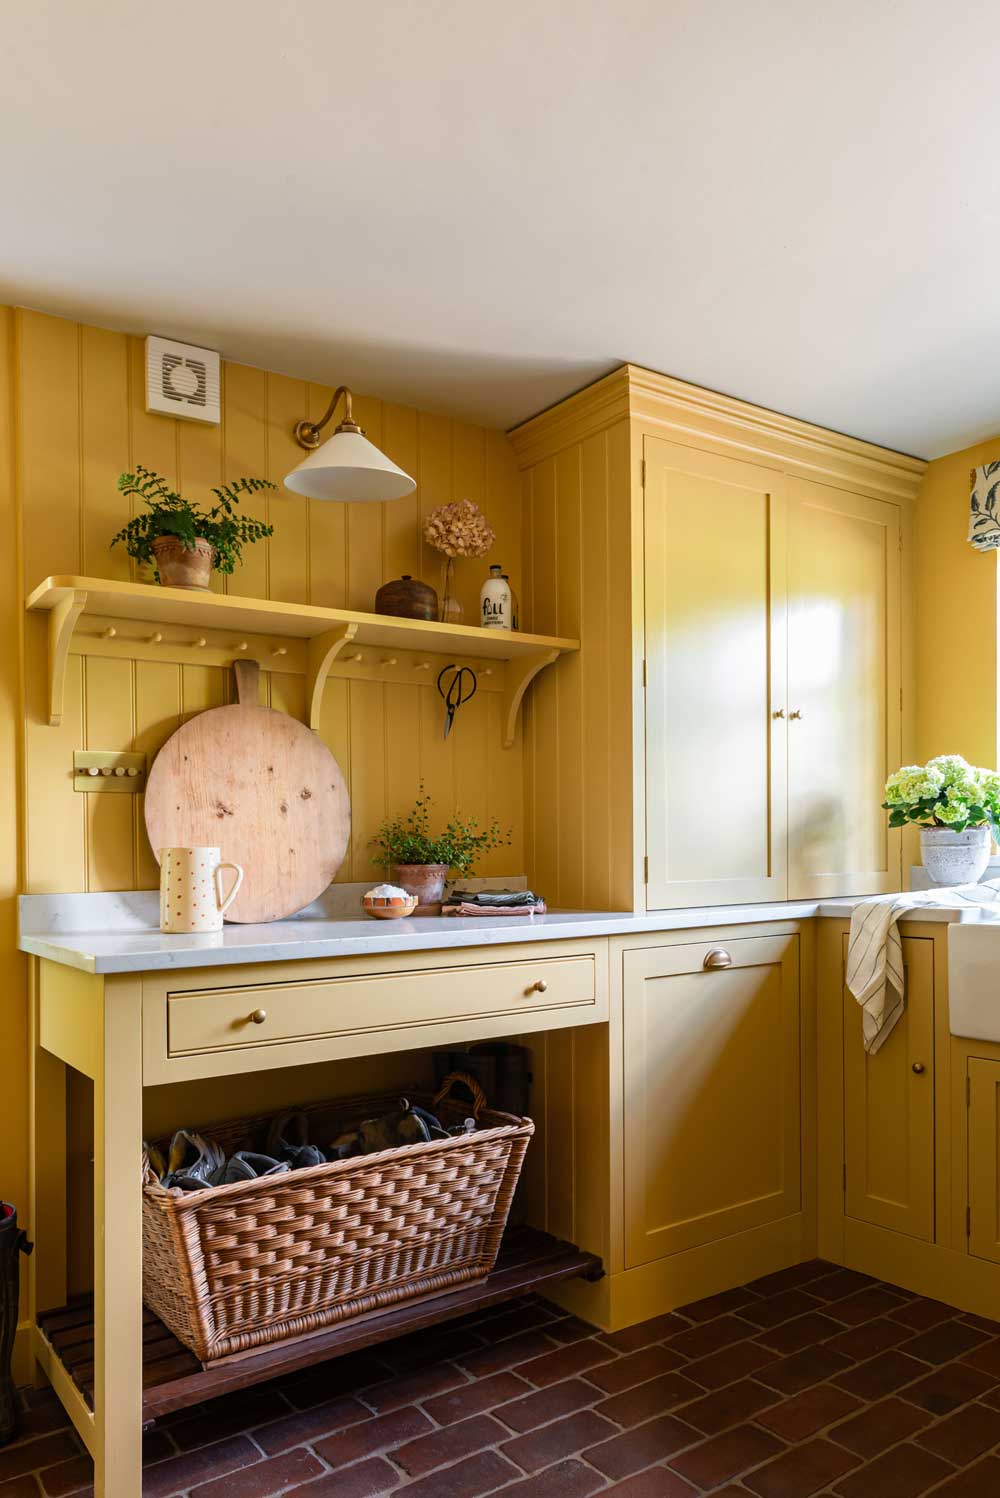 The Petworth Kitchen by Shere Kitchens - beautiful kitchens handmade in Shere Guildford Surrey